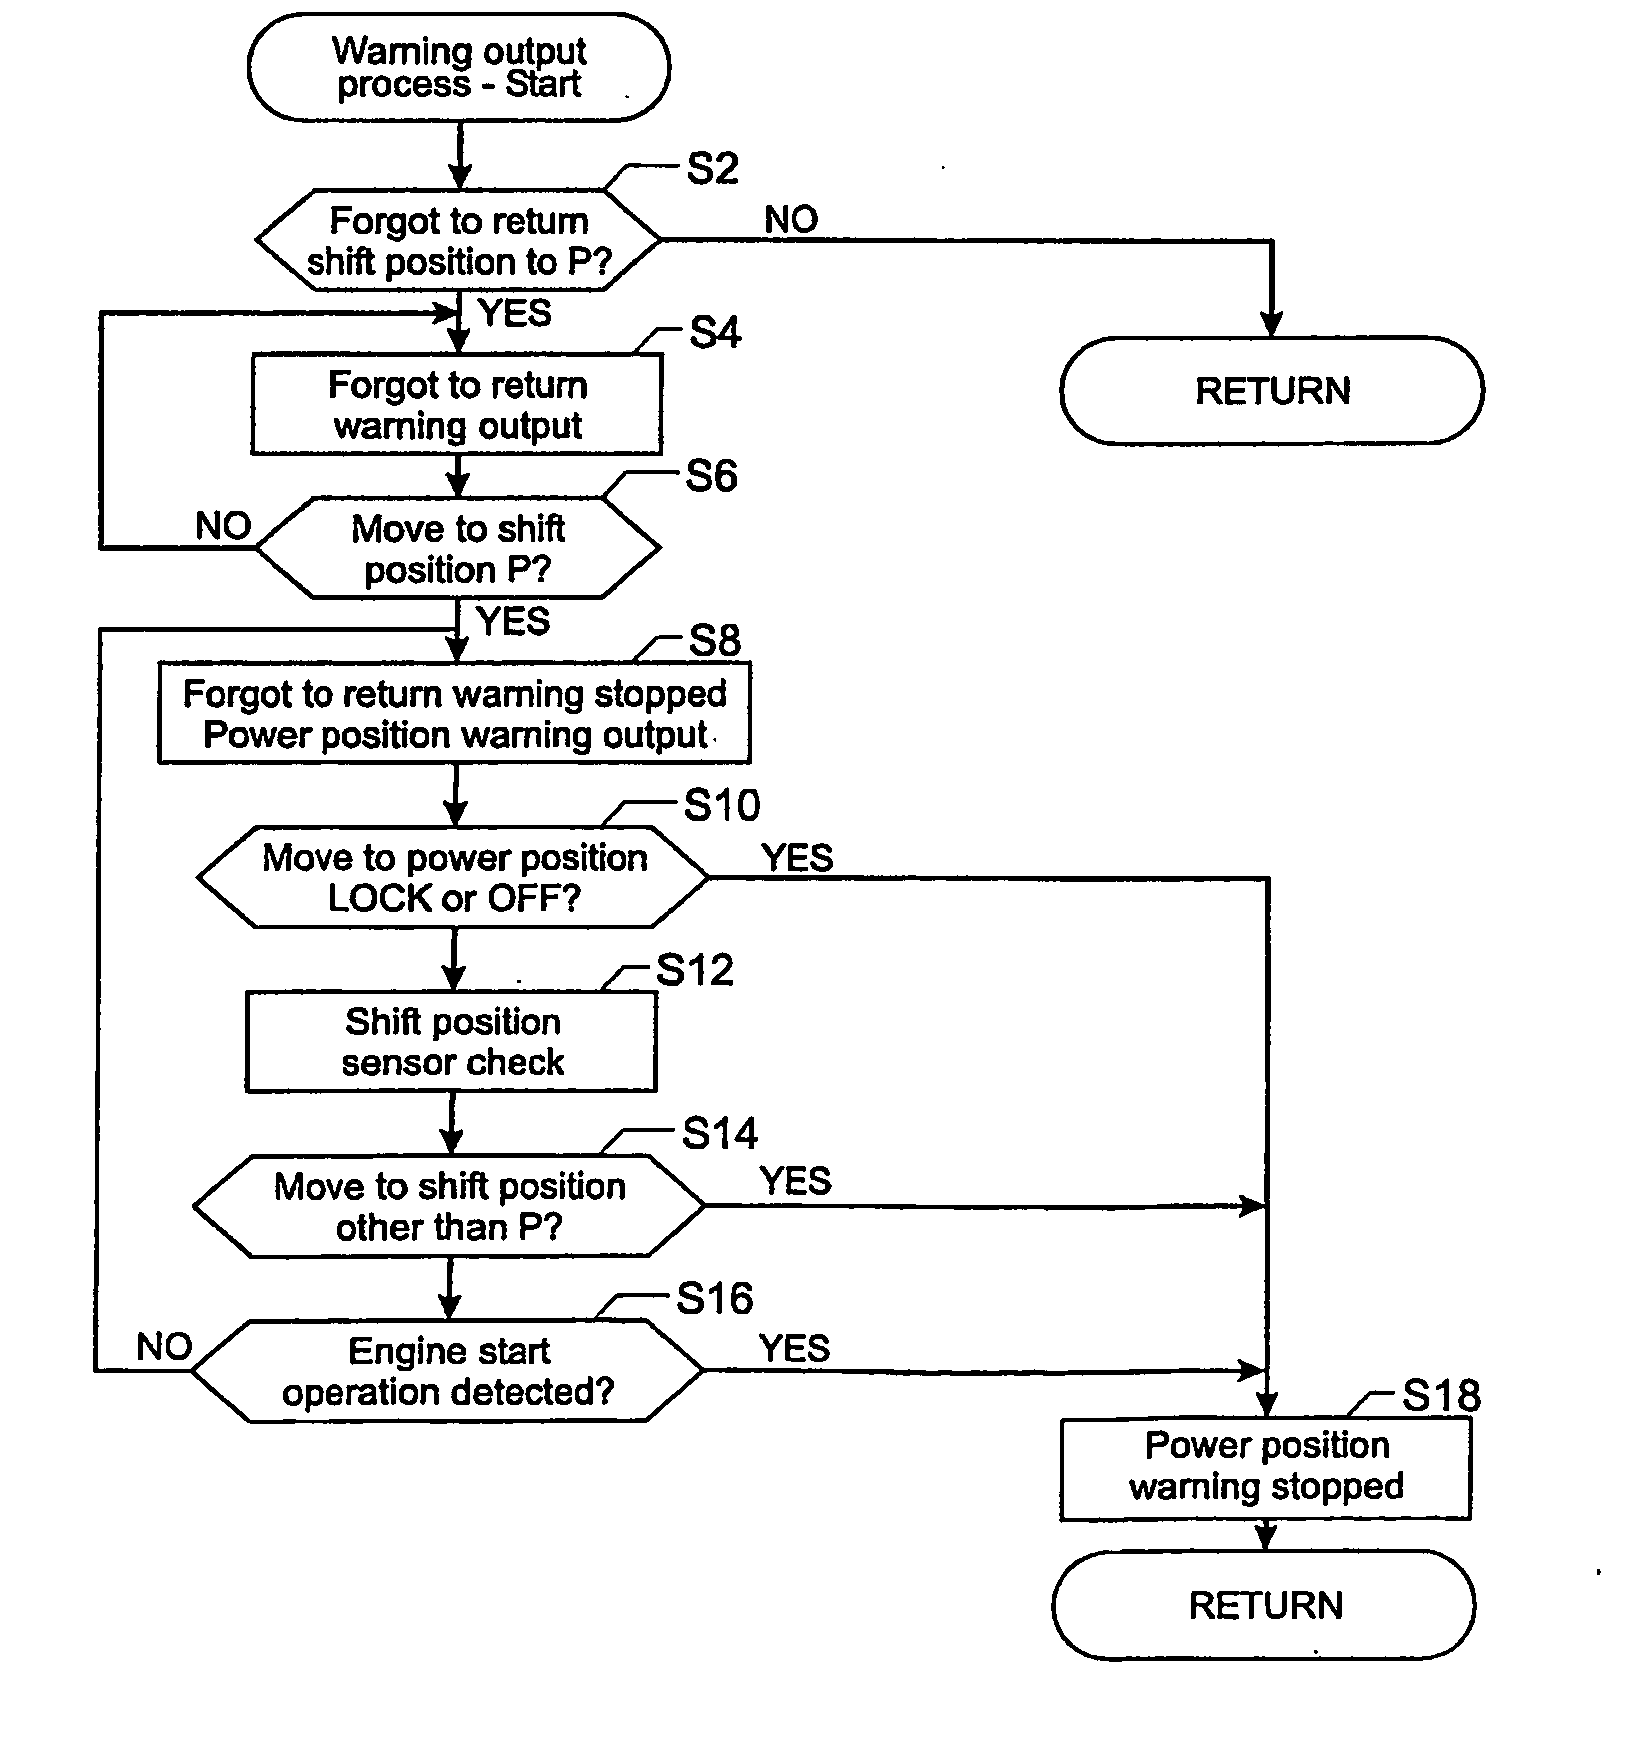 Warning System and Method of Providing a Warning